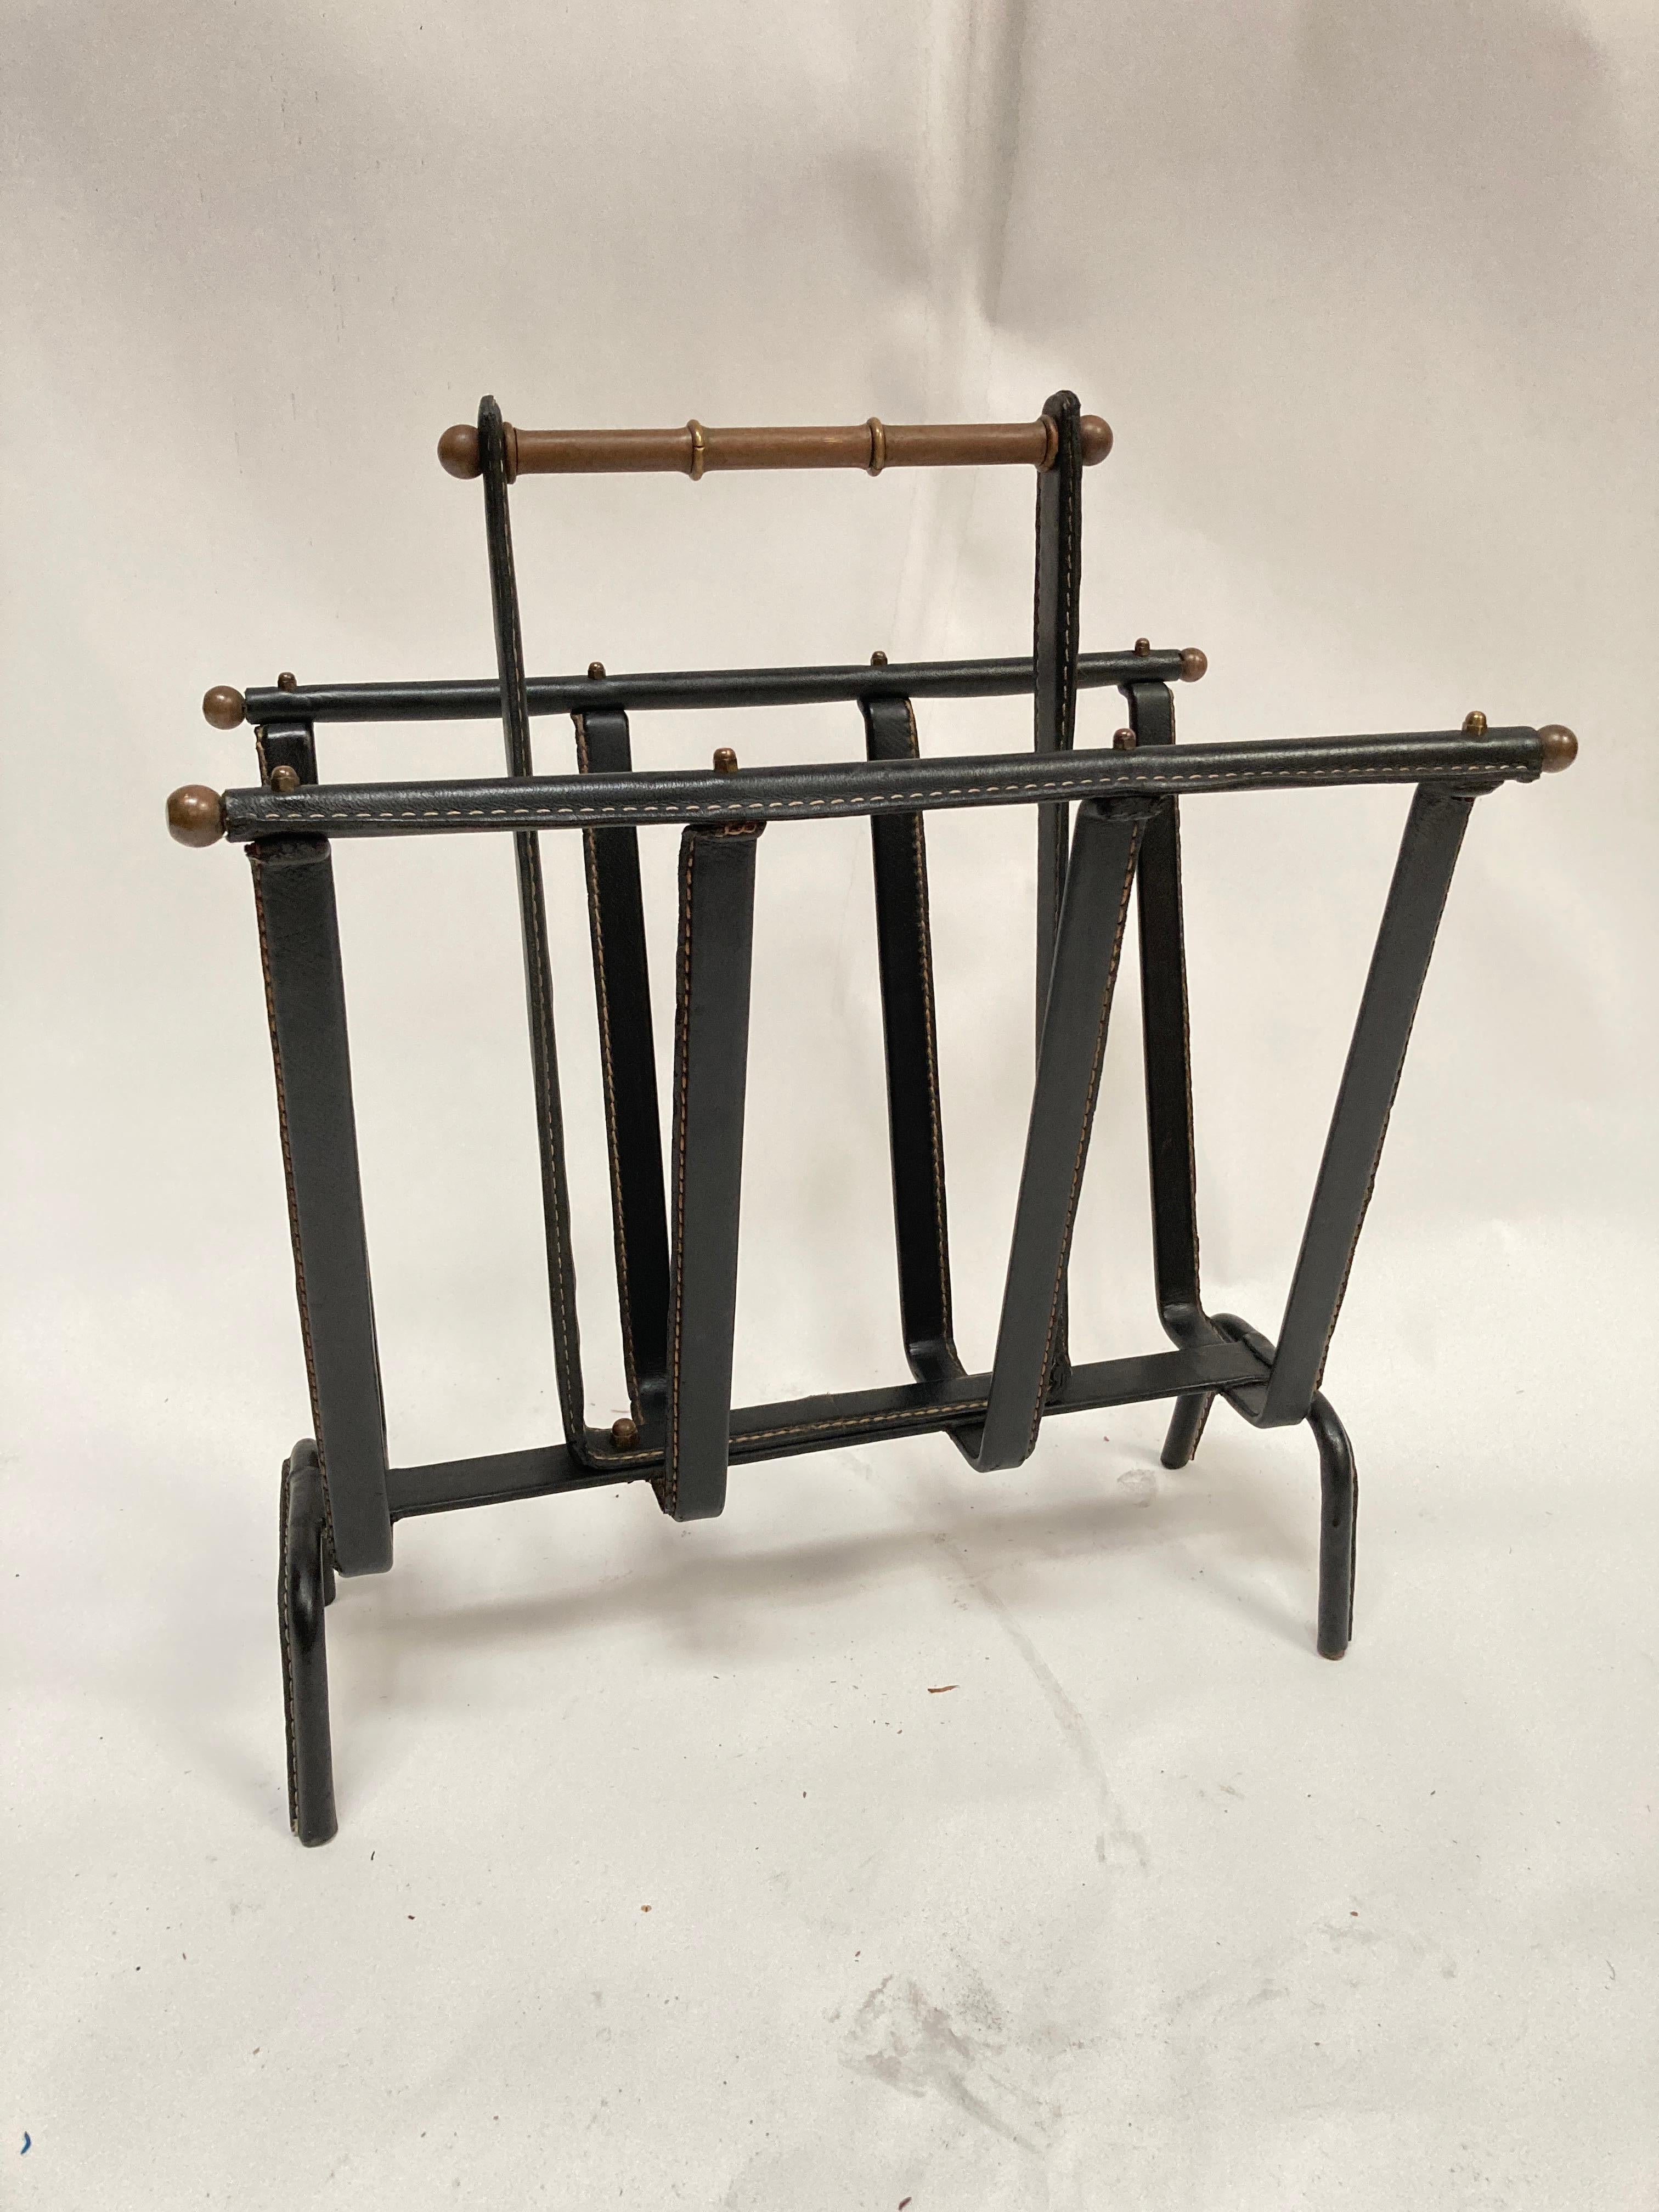 1950's Stitched leather magazines rack by Jacques Adnet
1950's
France